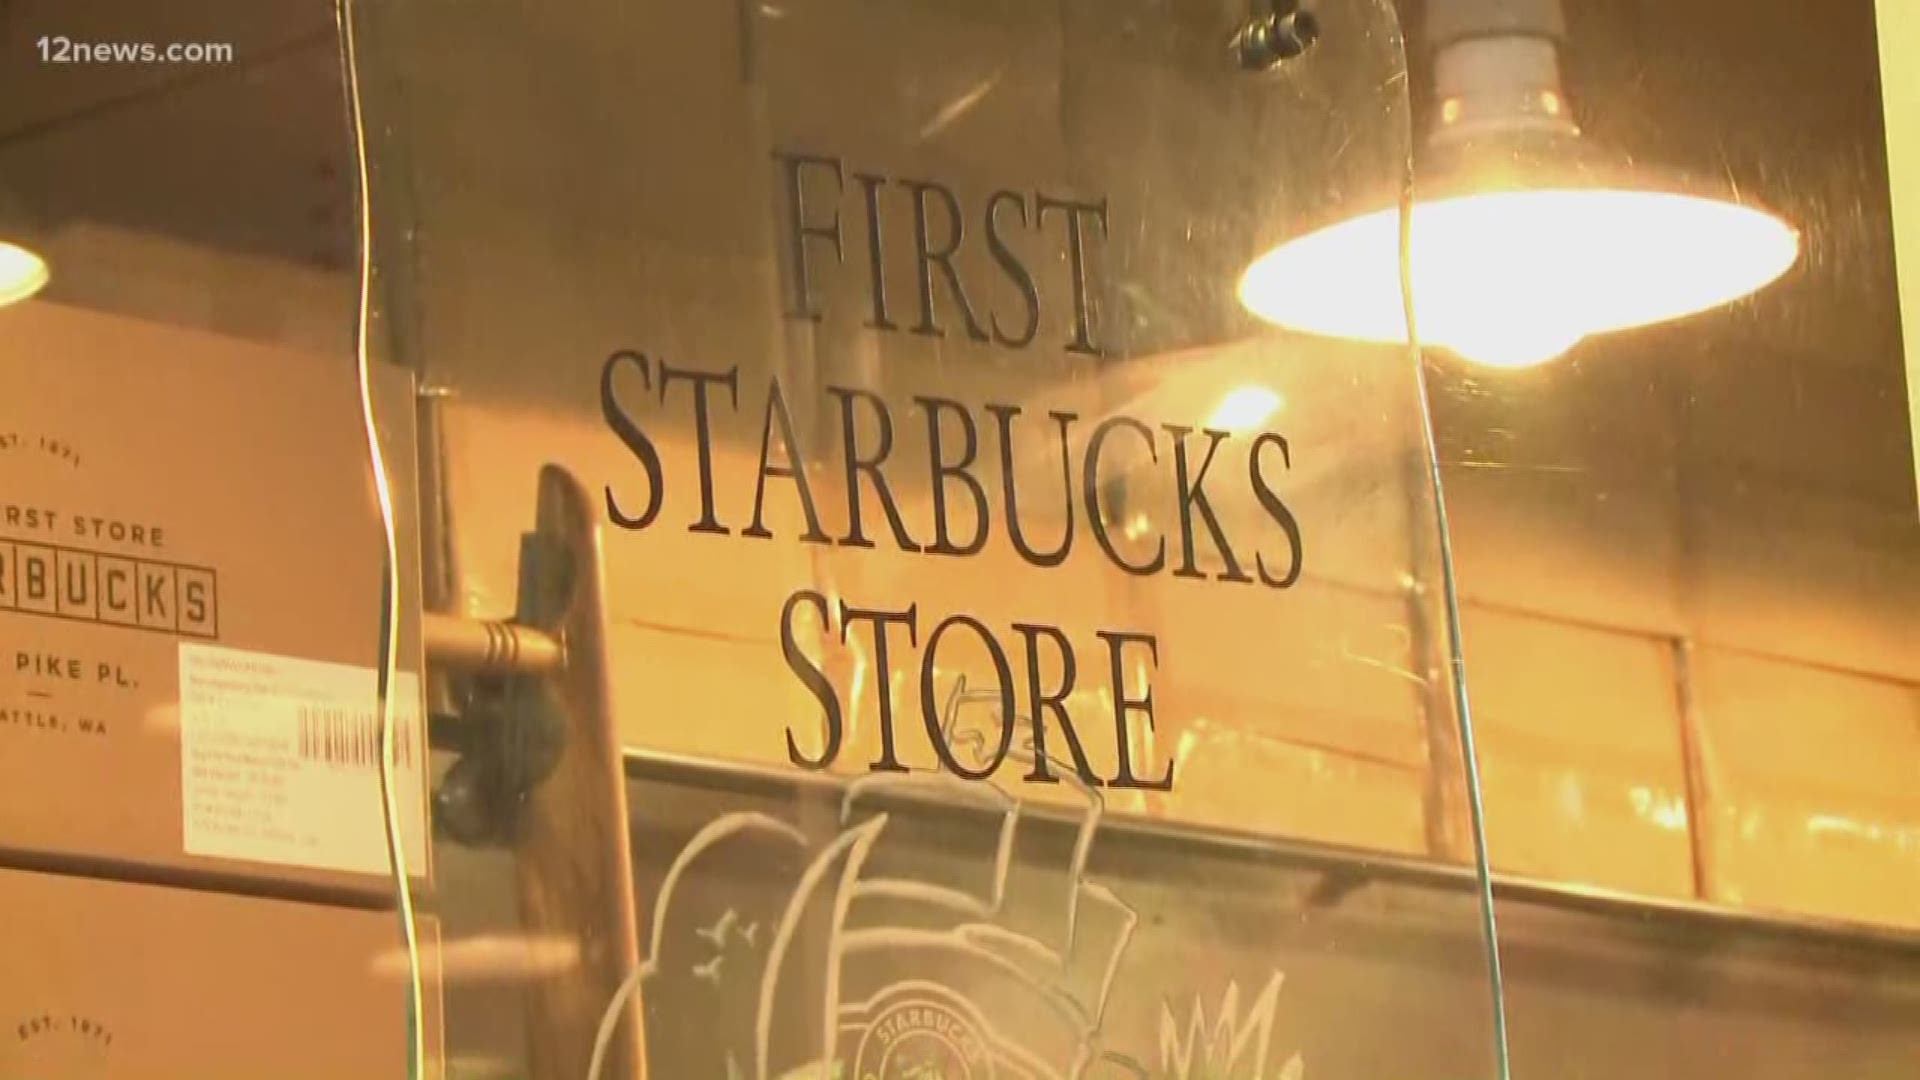 Paul shows us what it's like inside the original Starbucks in Seattle.